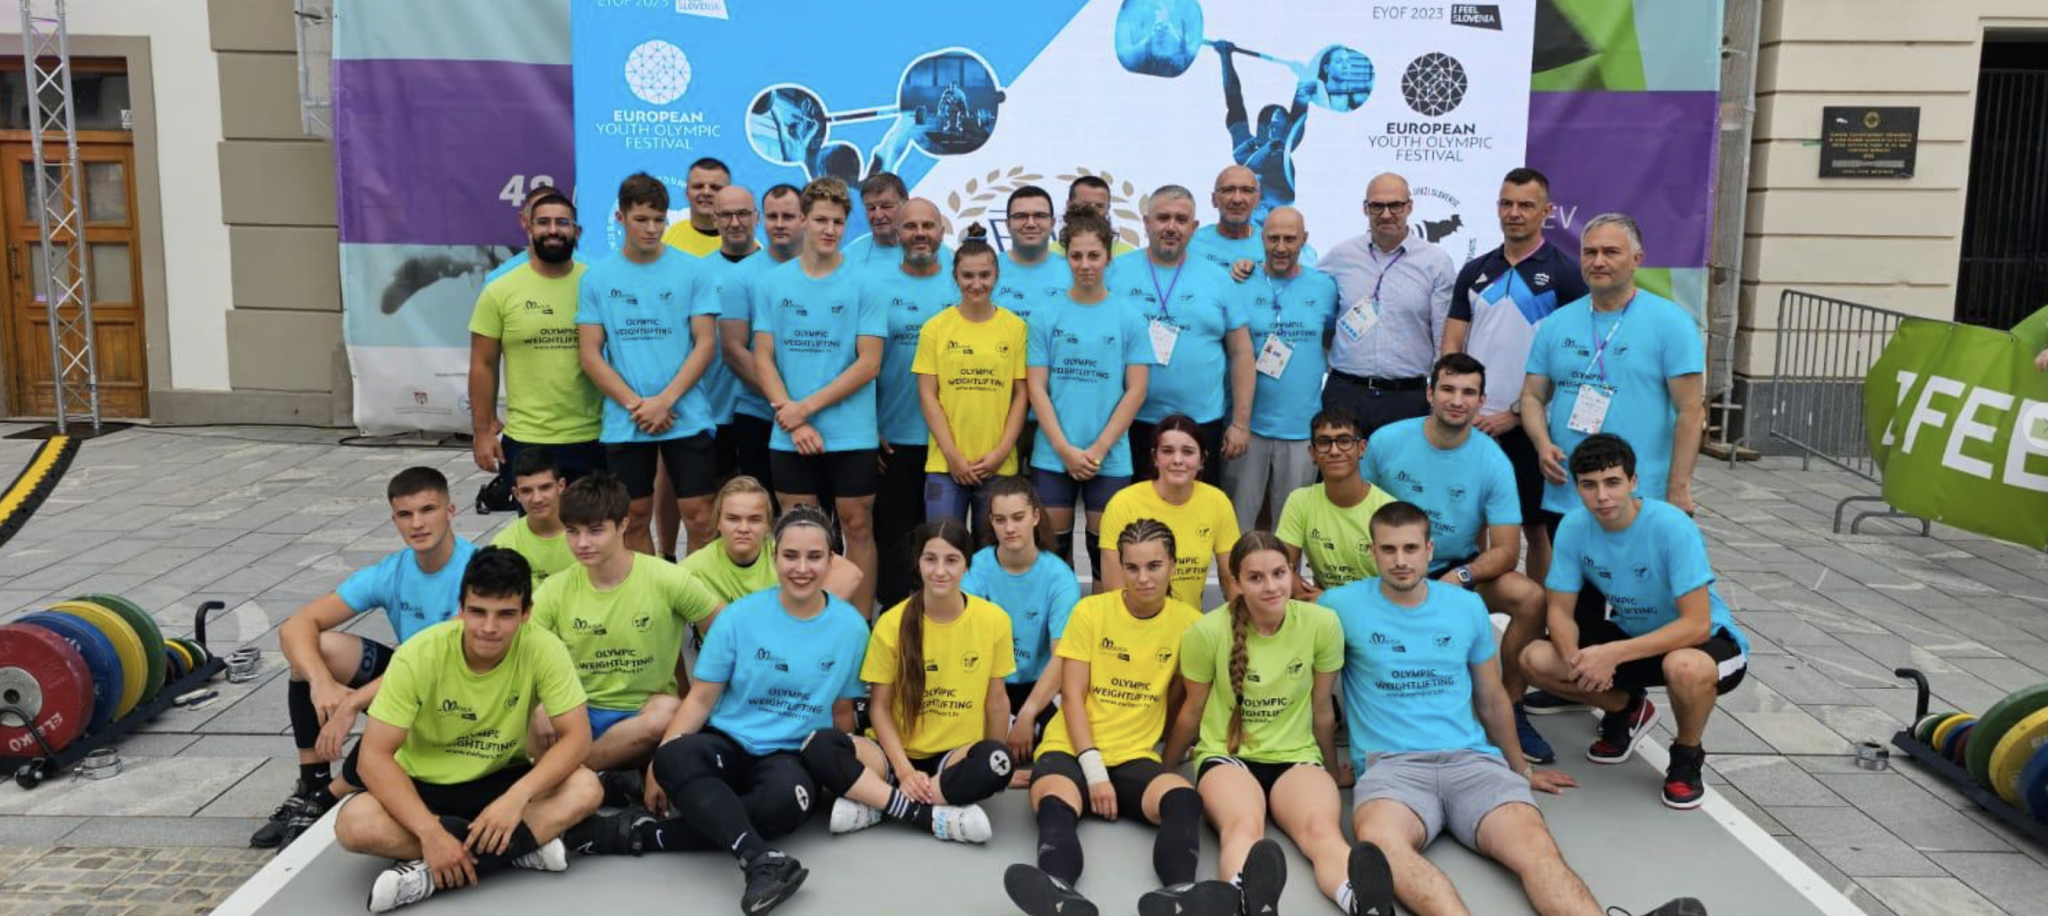 Participants in the weightlifting demonstration event as part of EYOF 2023 helped to 